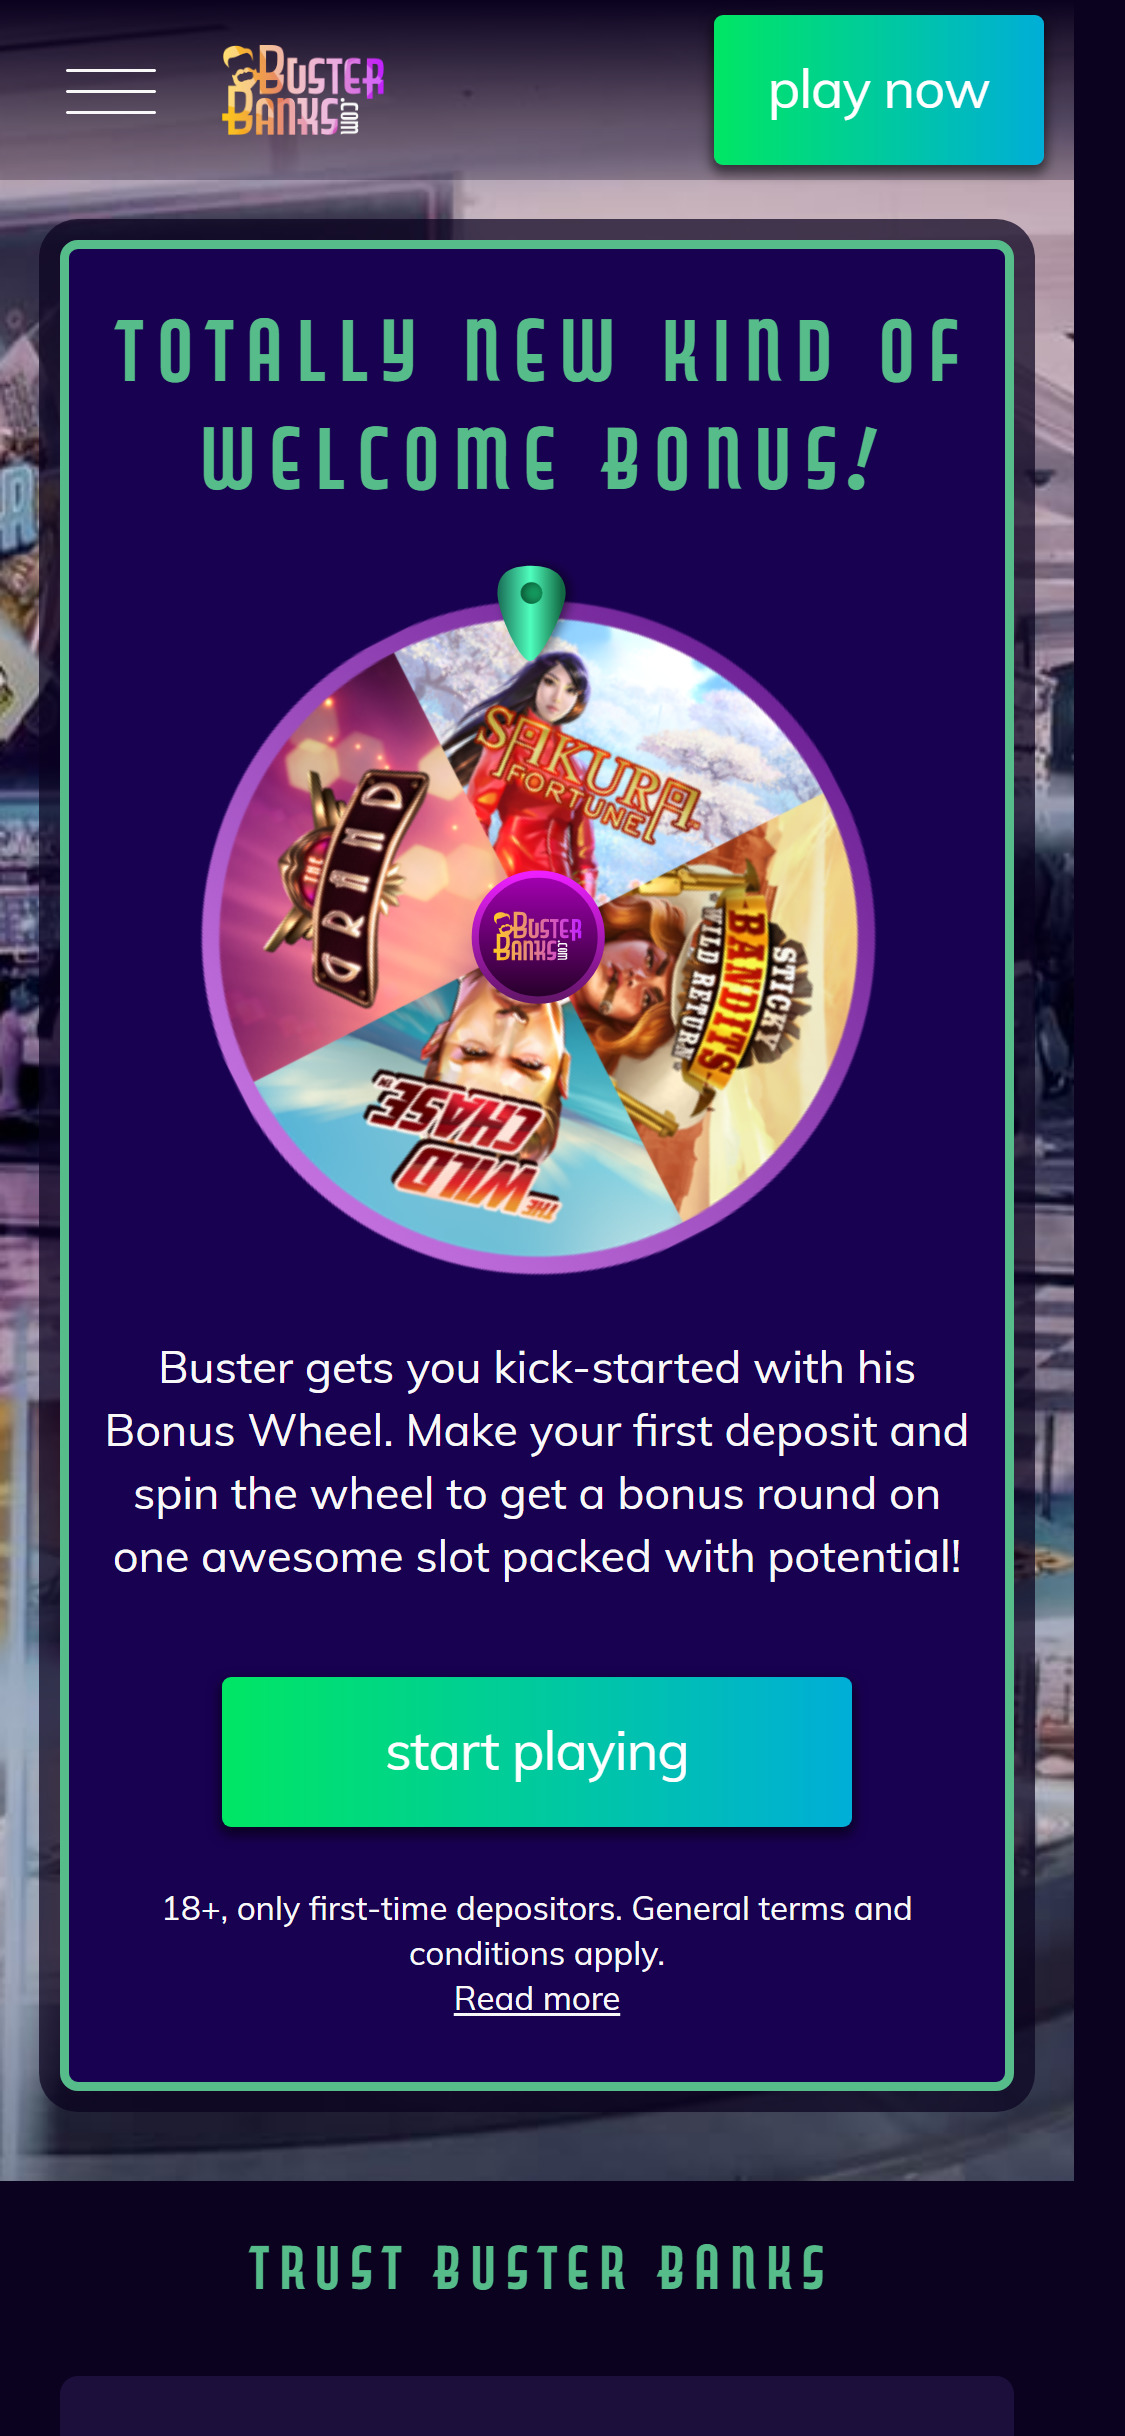 Buster Banks Mobile Review